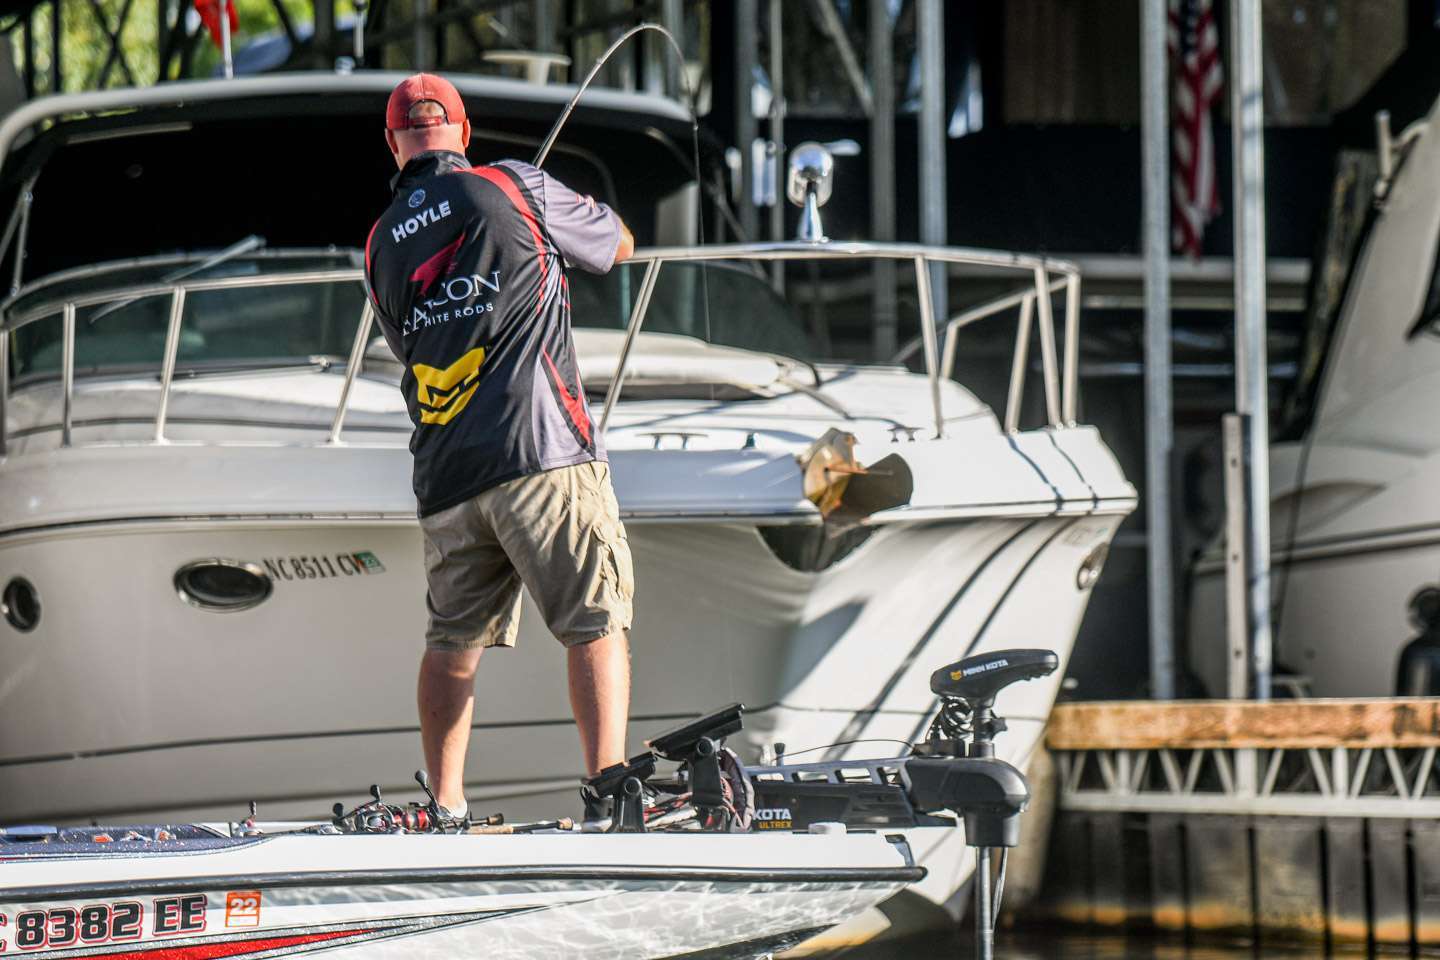 Cody Hoyle did what he does best. A skilled local tournament angler, the North Carolinian fished more than 100 docks during the three days to win the event with 40 pounds, 4 ounces. See the lures used by the winner and top finishers, and get geared up for the fall transition with their choices. 
